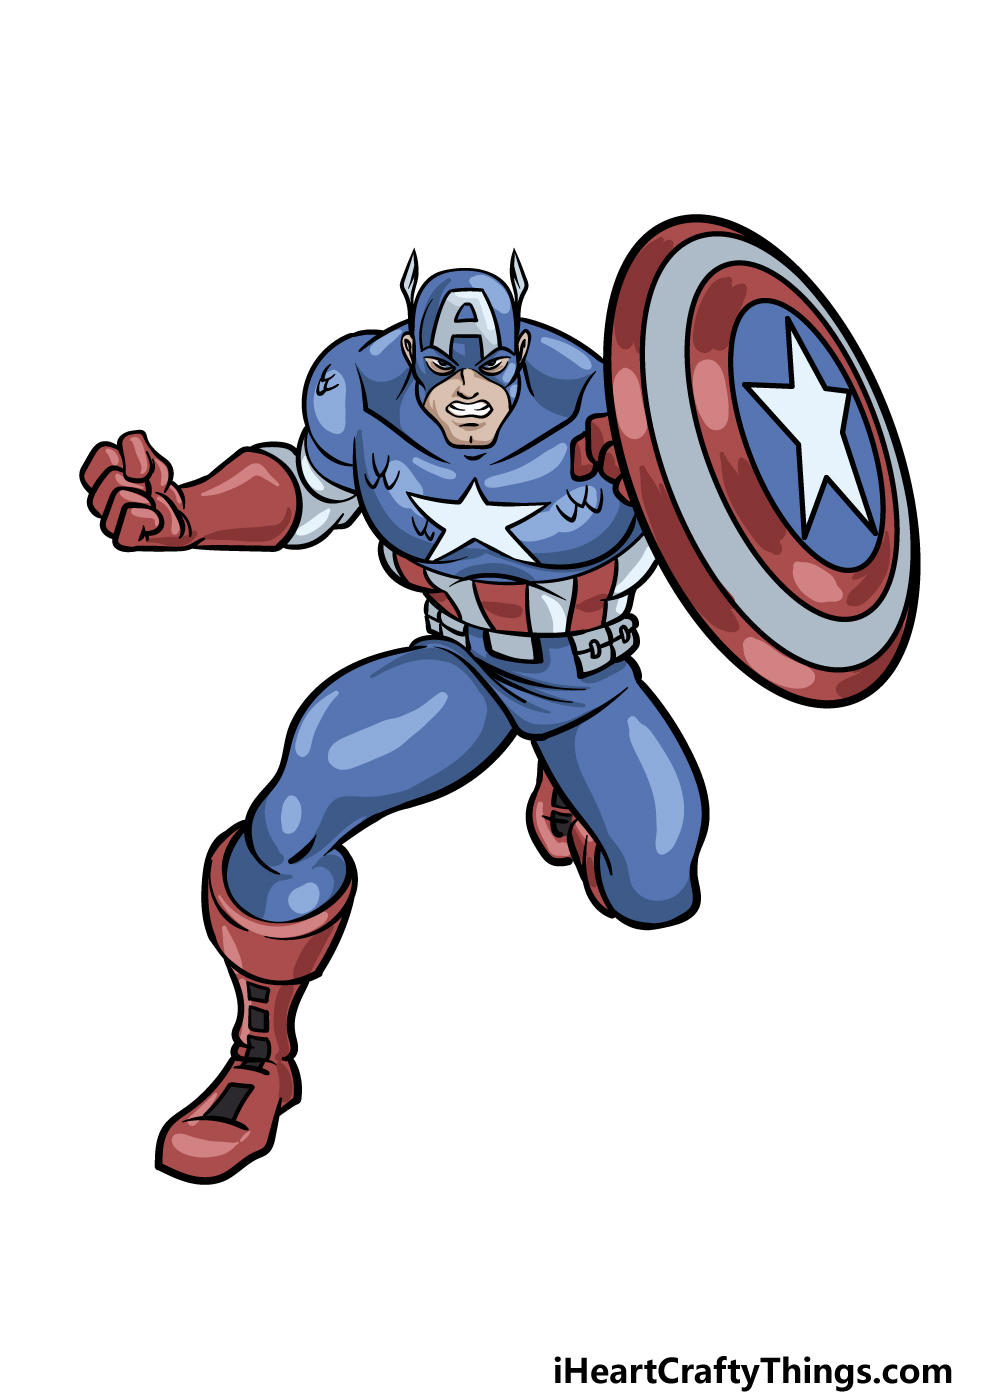 Captain America Drawing - How To Draw Captain America Step By Step